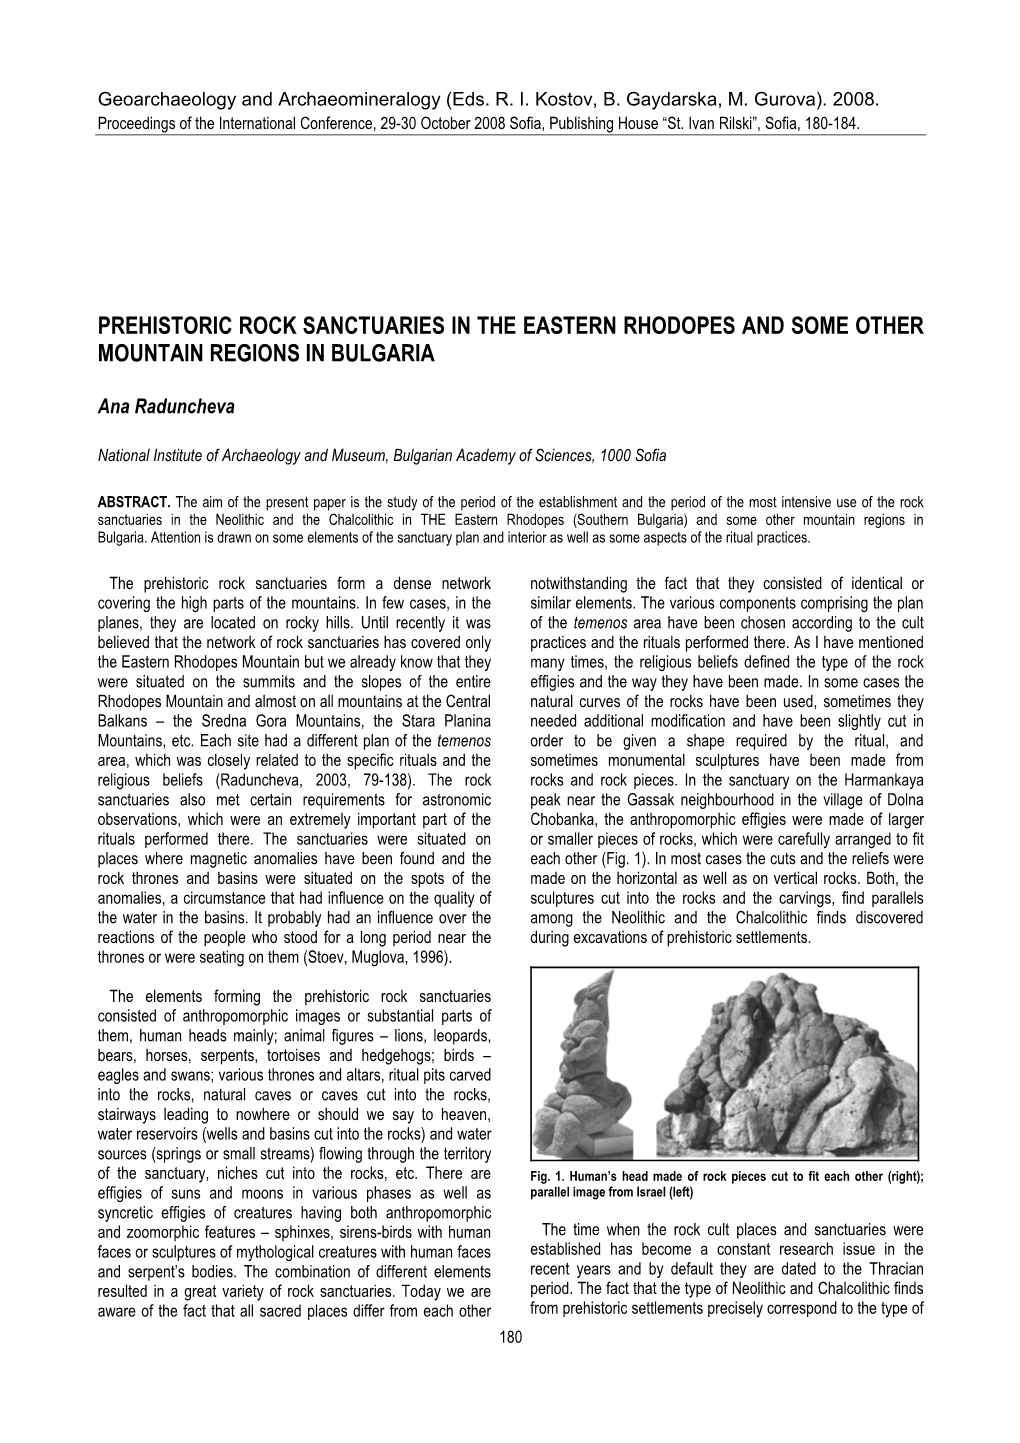 Prehistoric Rock Sanctuaries in the Eastern Rhodopes and Some Other Mountain Regions in Bulgaria